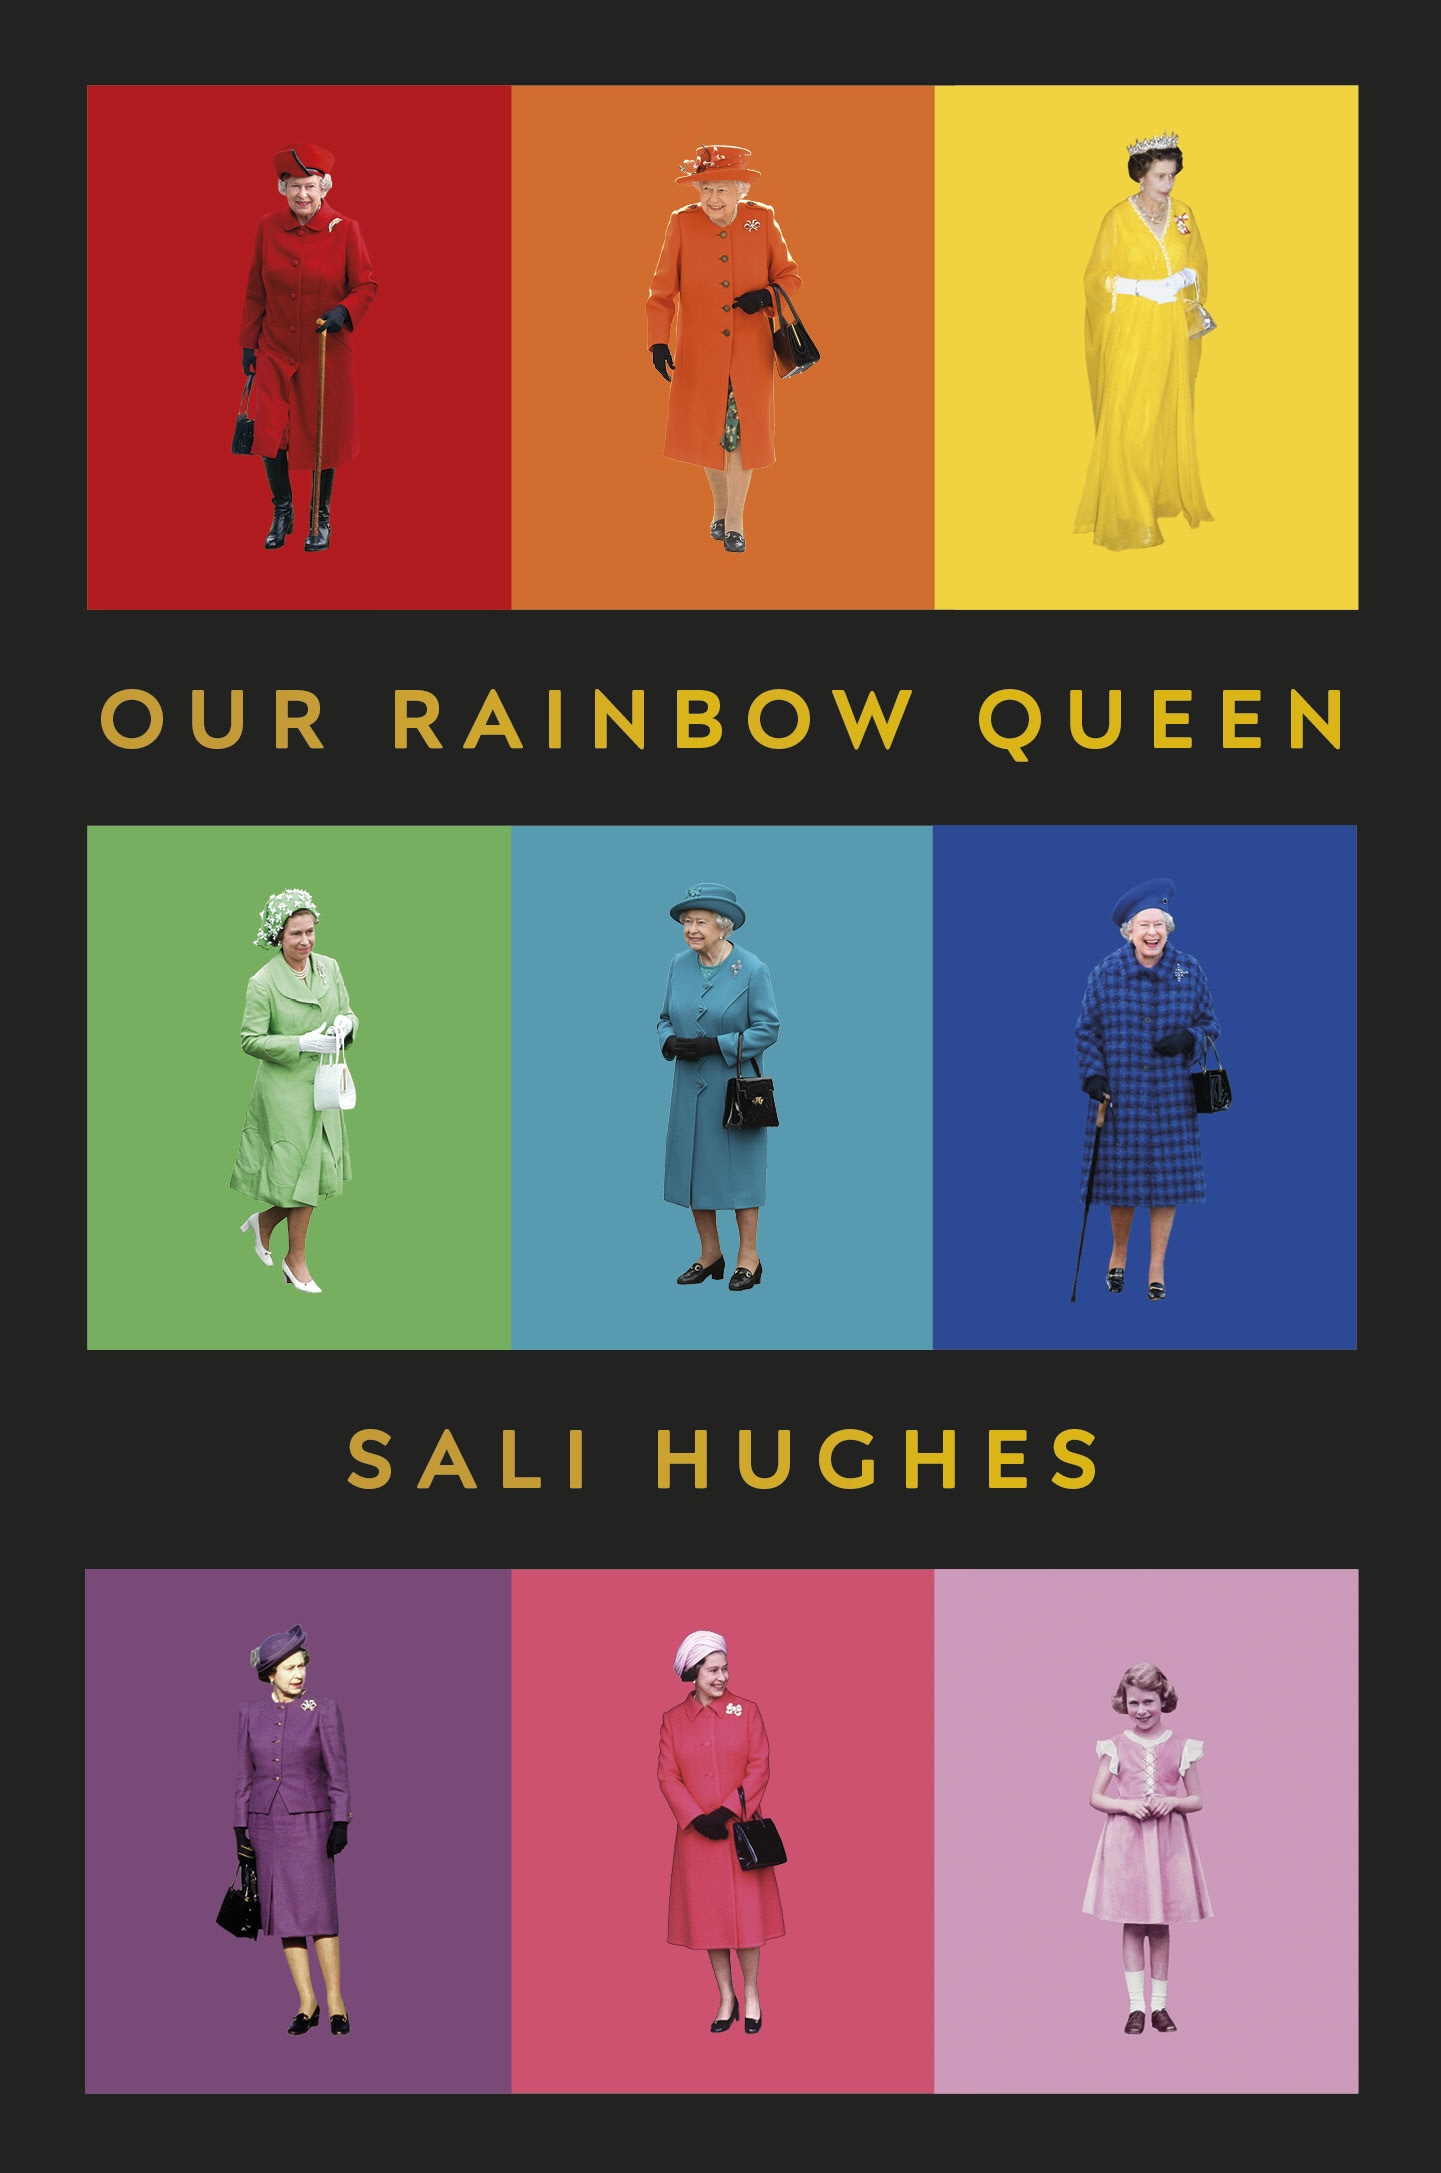 Book “Our Rainbow Queen” by Sali Hughes — May 30, 2019